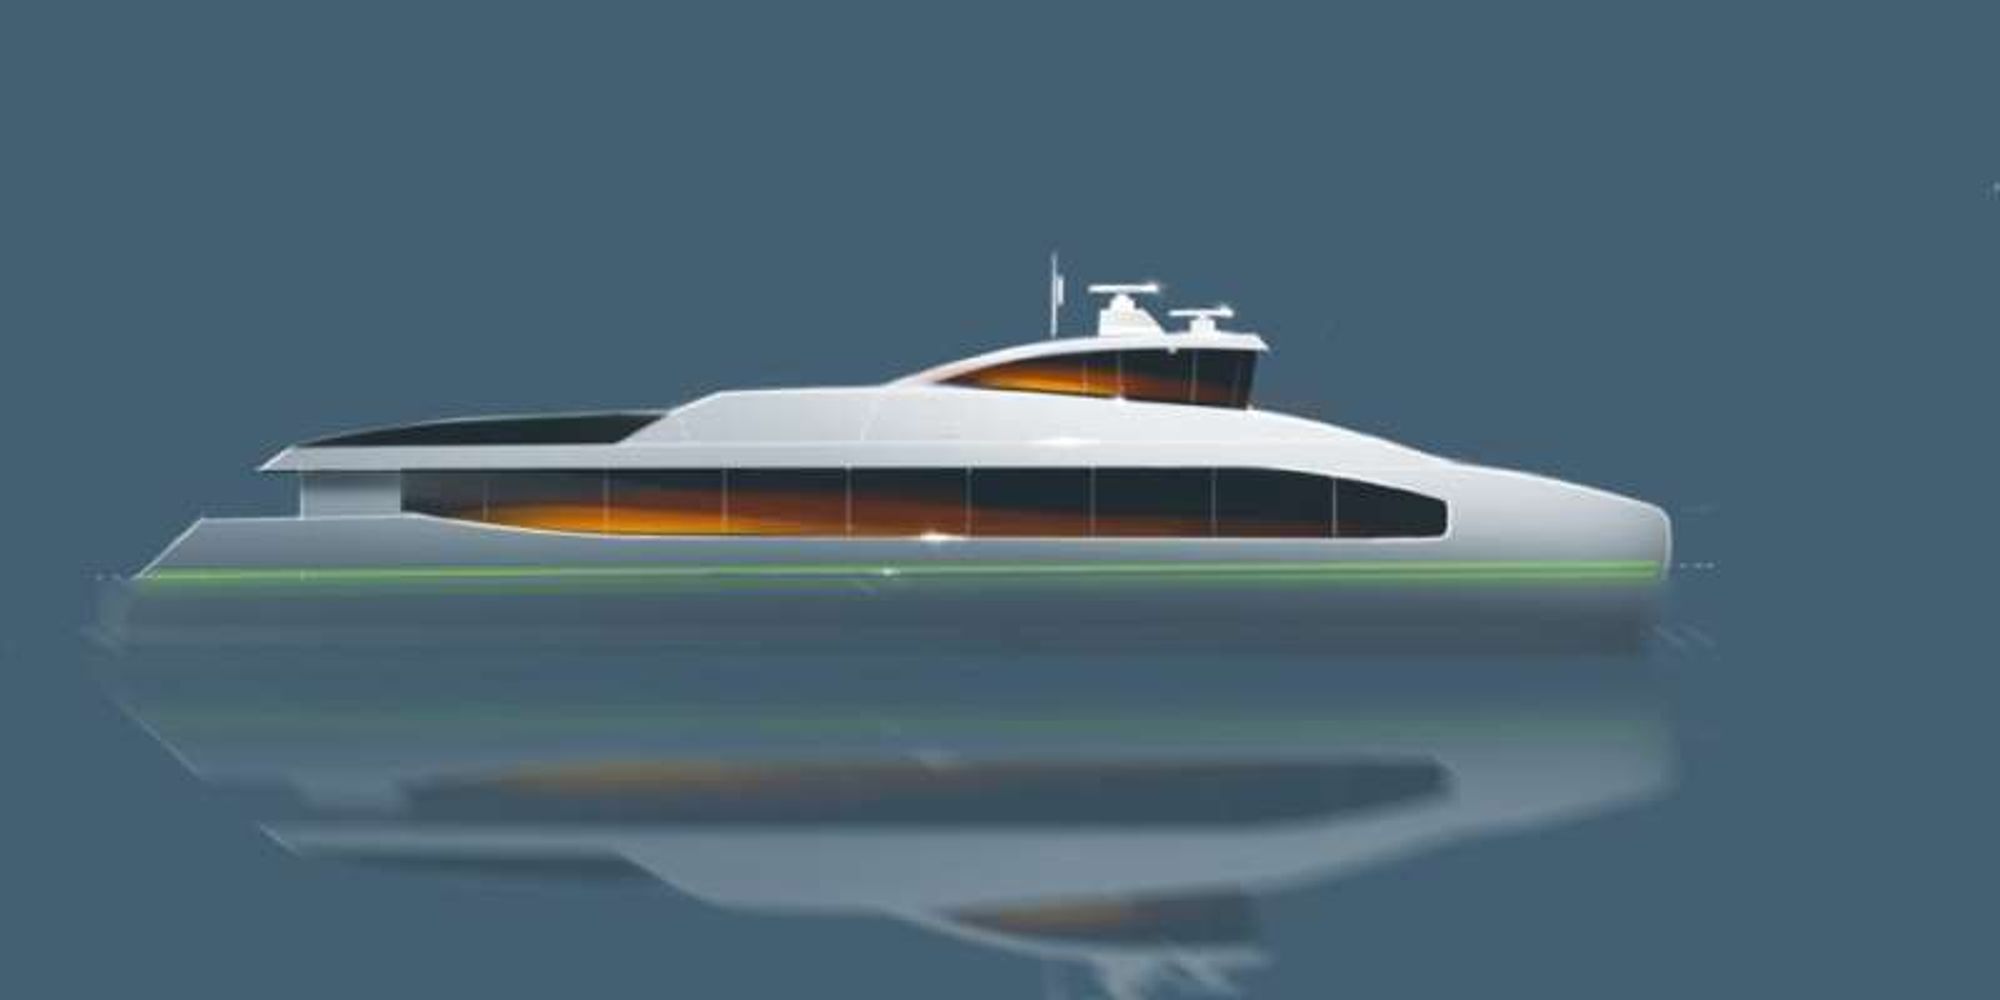 Creating an identity for the world's first fully electric high-speed ferry